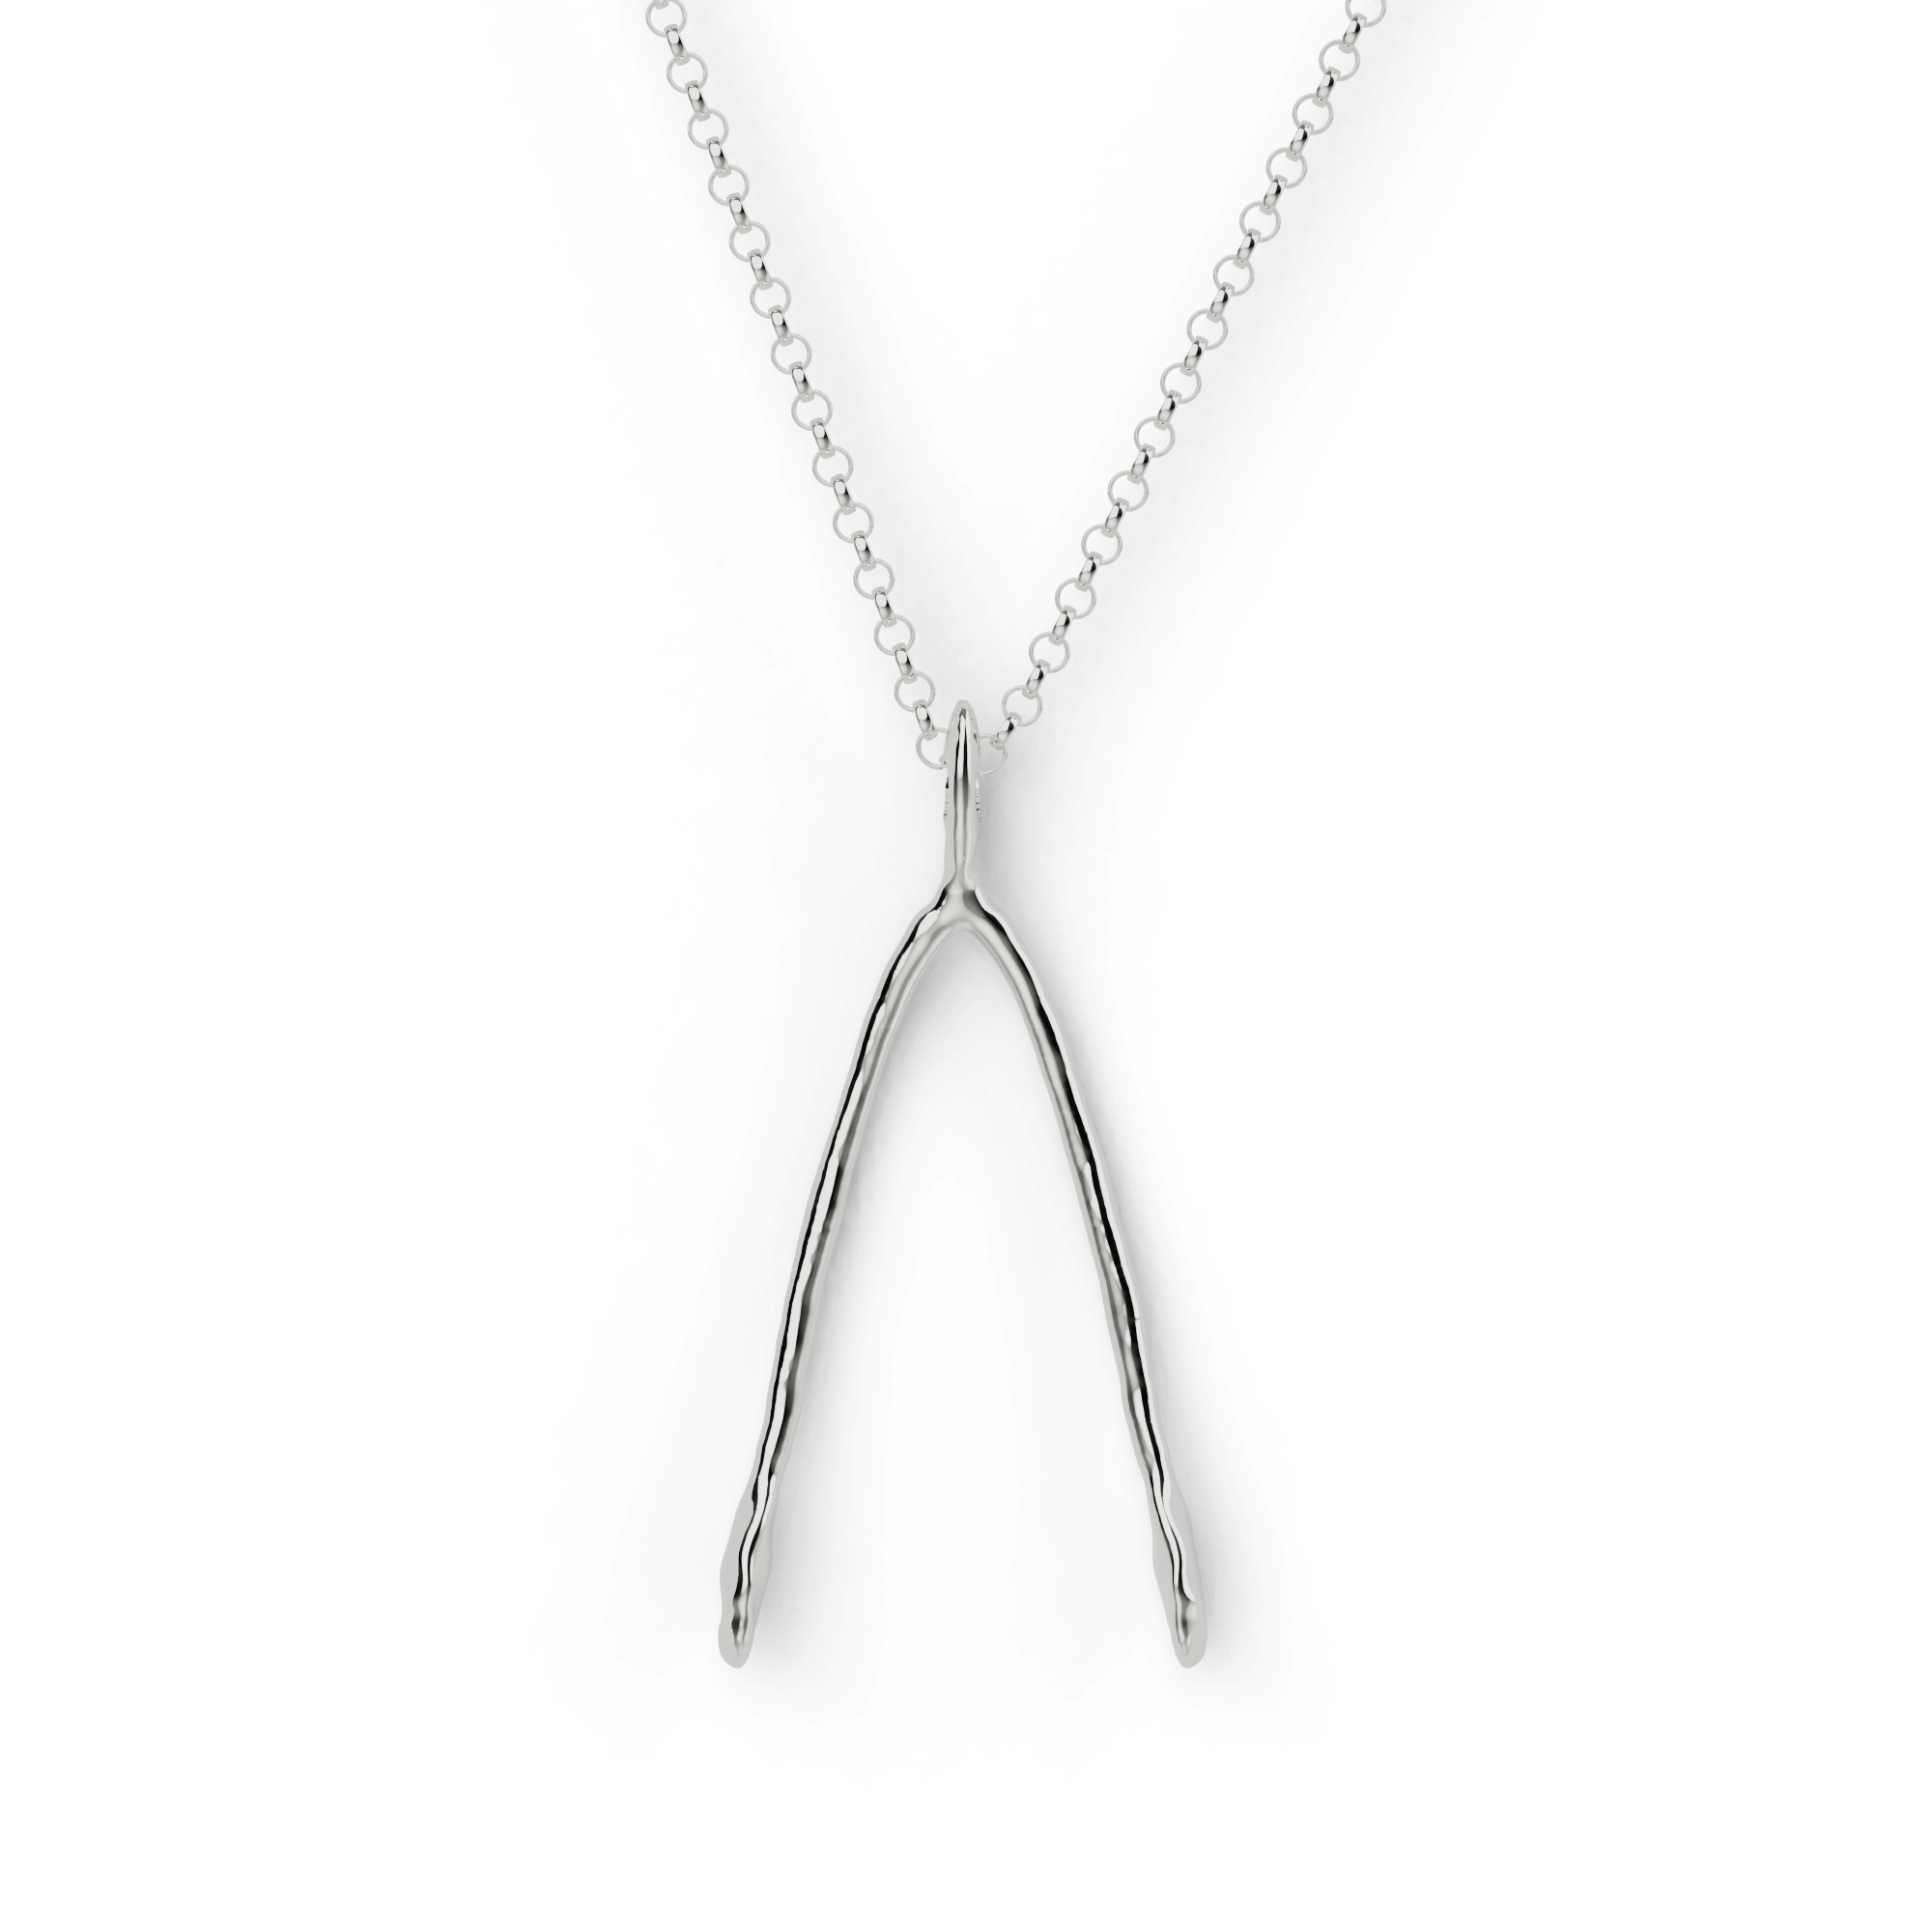 Wishbone Pendant Lucky Necklace 925 Sterling Silver 18